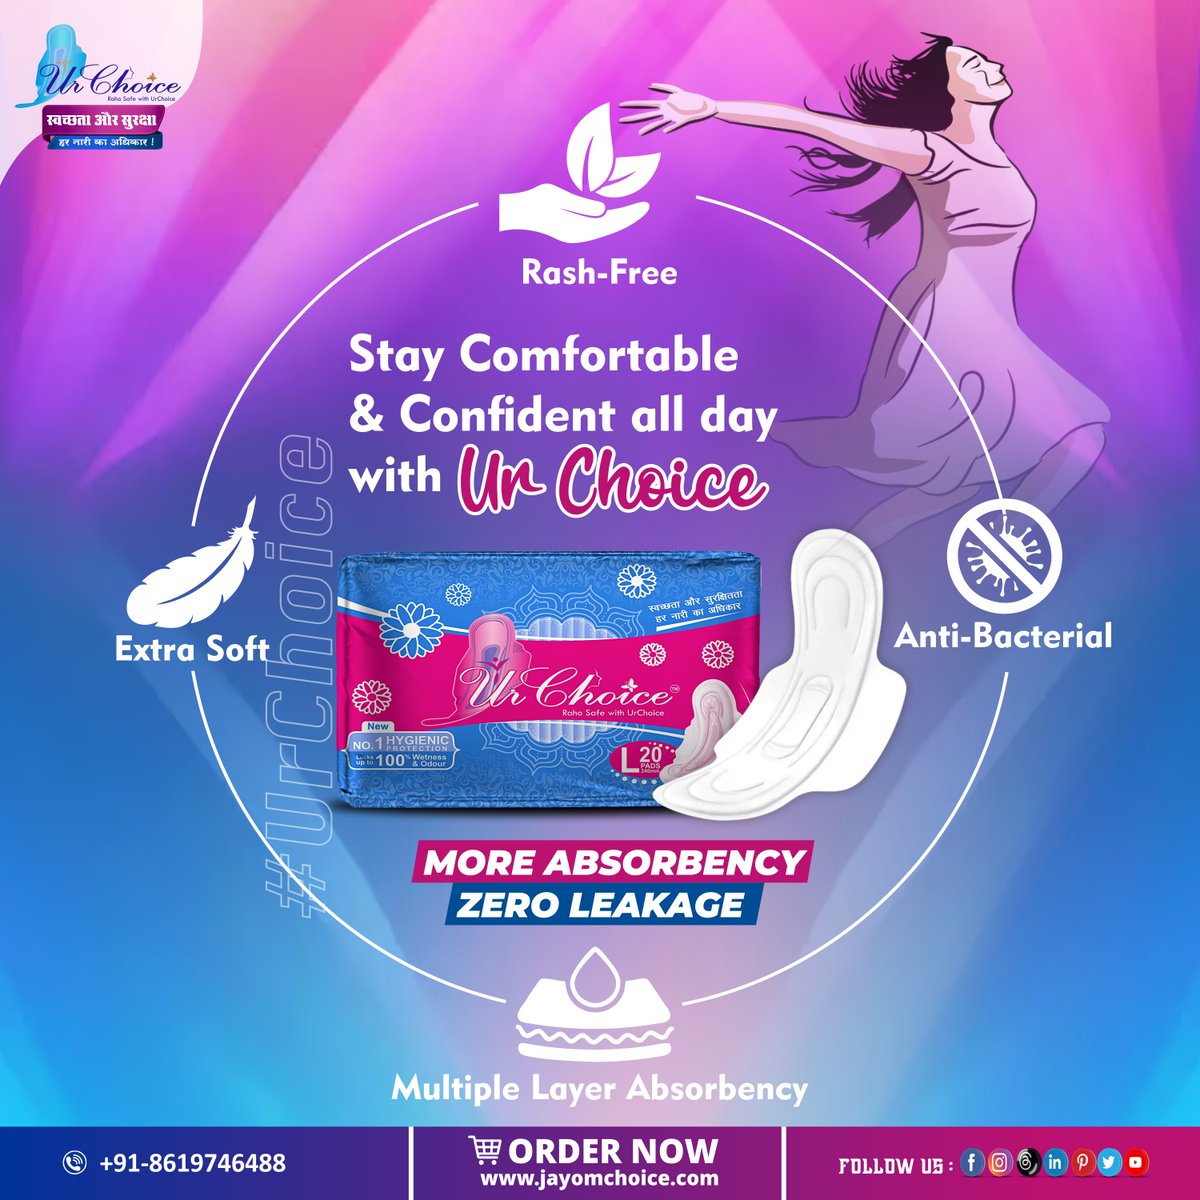 Stay comfortable and confident all day long with Ur Choice ultra-absorbent and leak-proof sanitary pads. Experience freedom and protection, every step of the way.
Order Now : jayomchoice.com
#StayPrepared #urchoice #PeriodProtection #leakagefree #SanitaryPads #BANvIND